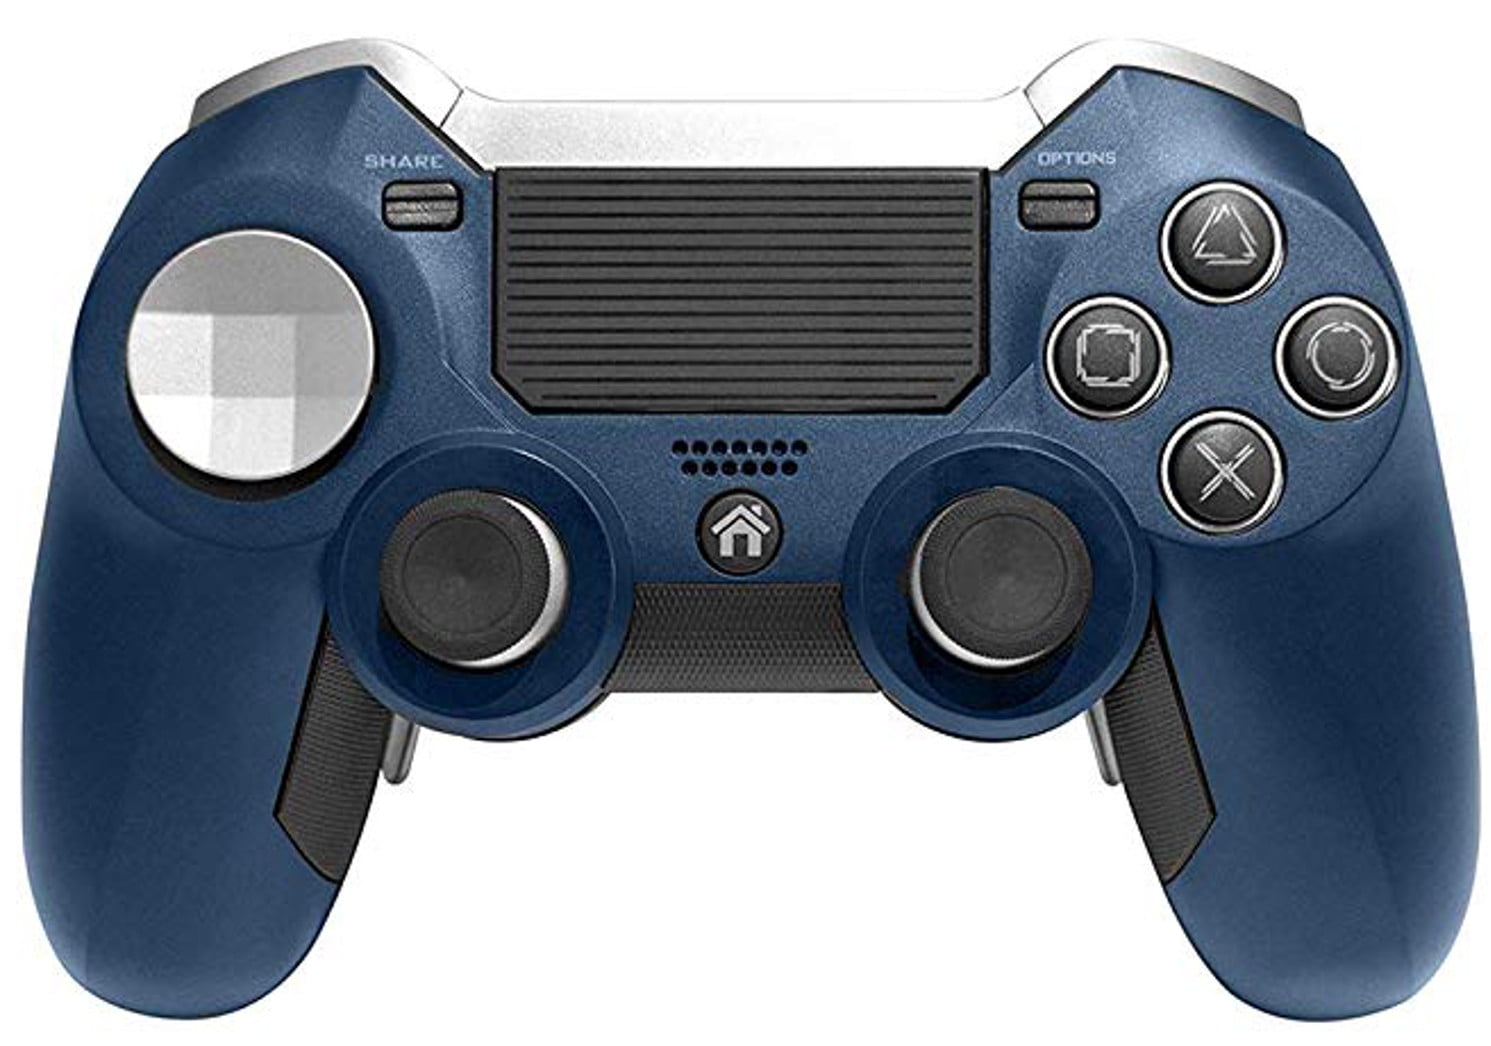 Slette radium tidsplan Bluetooth Elite Ps4 Controller for Ps4 Playstation 4 with Back Paddles and  Audio Jack 3.55 Plug in - Walmart.com